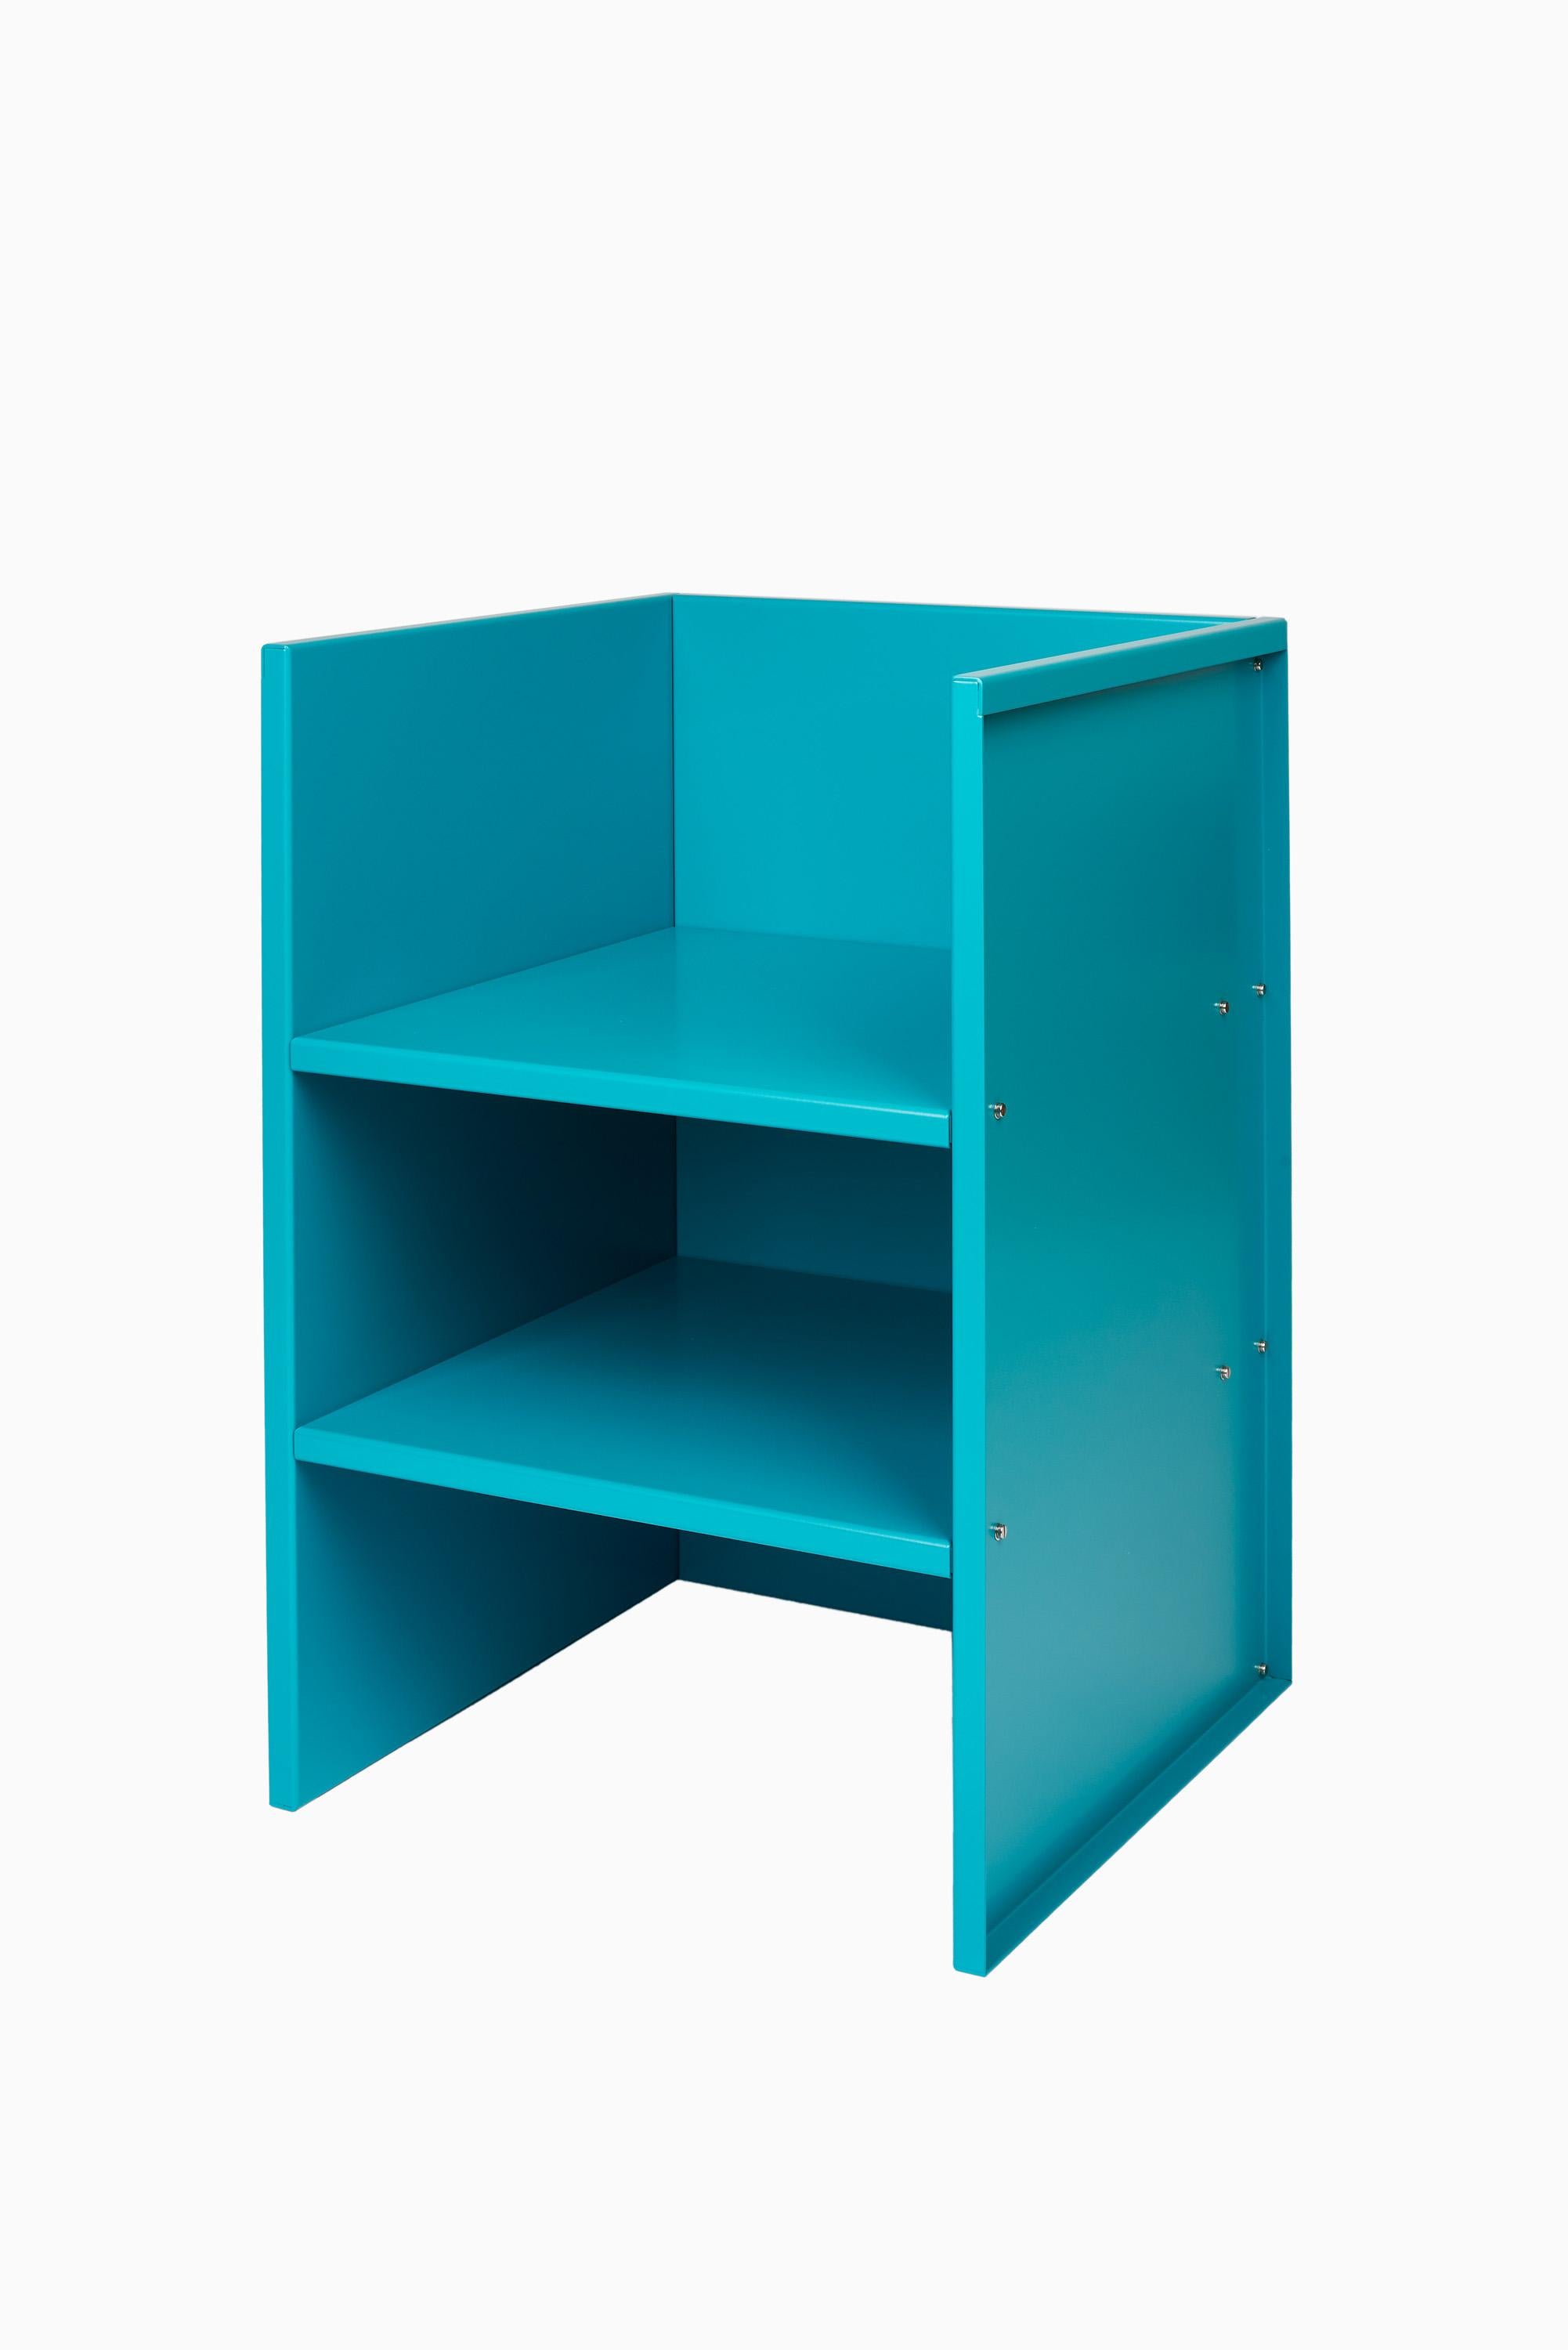 Armchair 47/48 American Minimalist Judd Chair Turquoise blue painted aluminum  - Art by Donald Judd